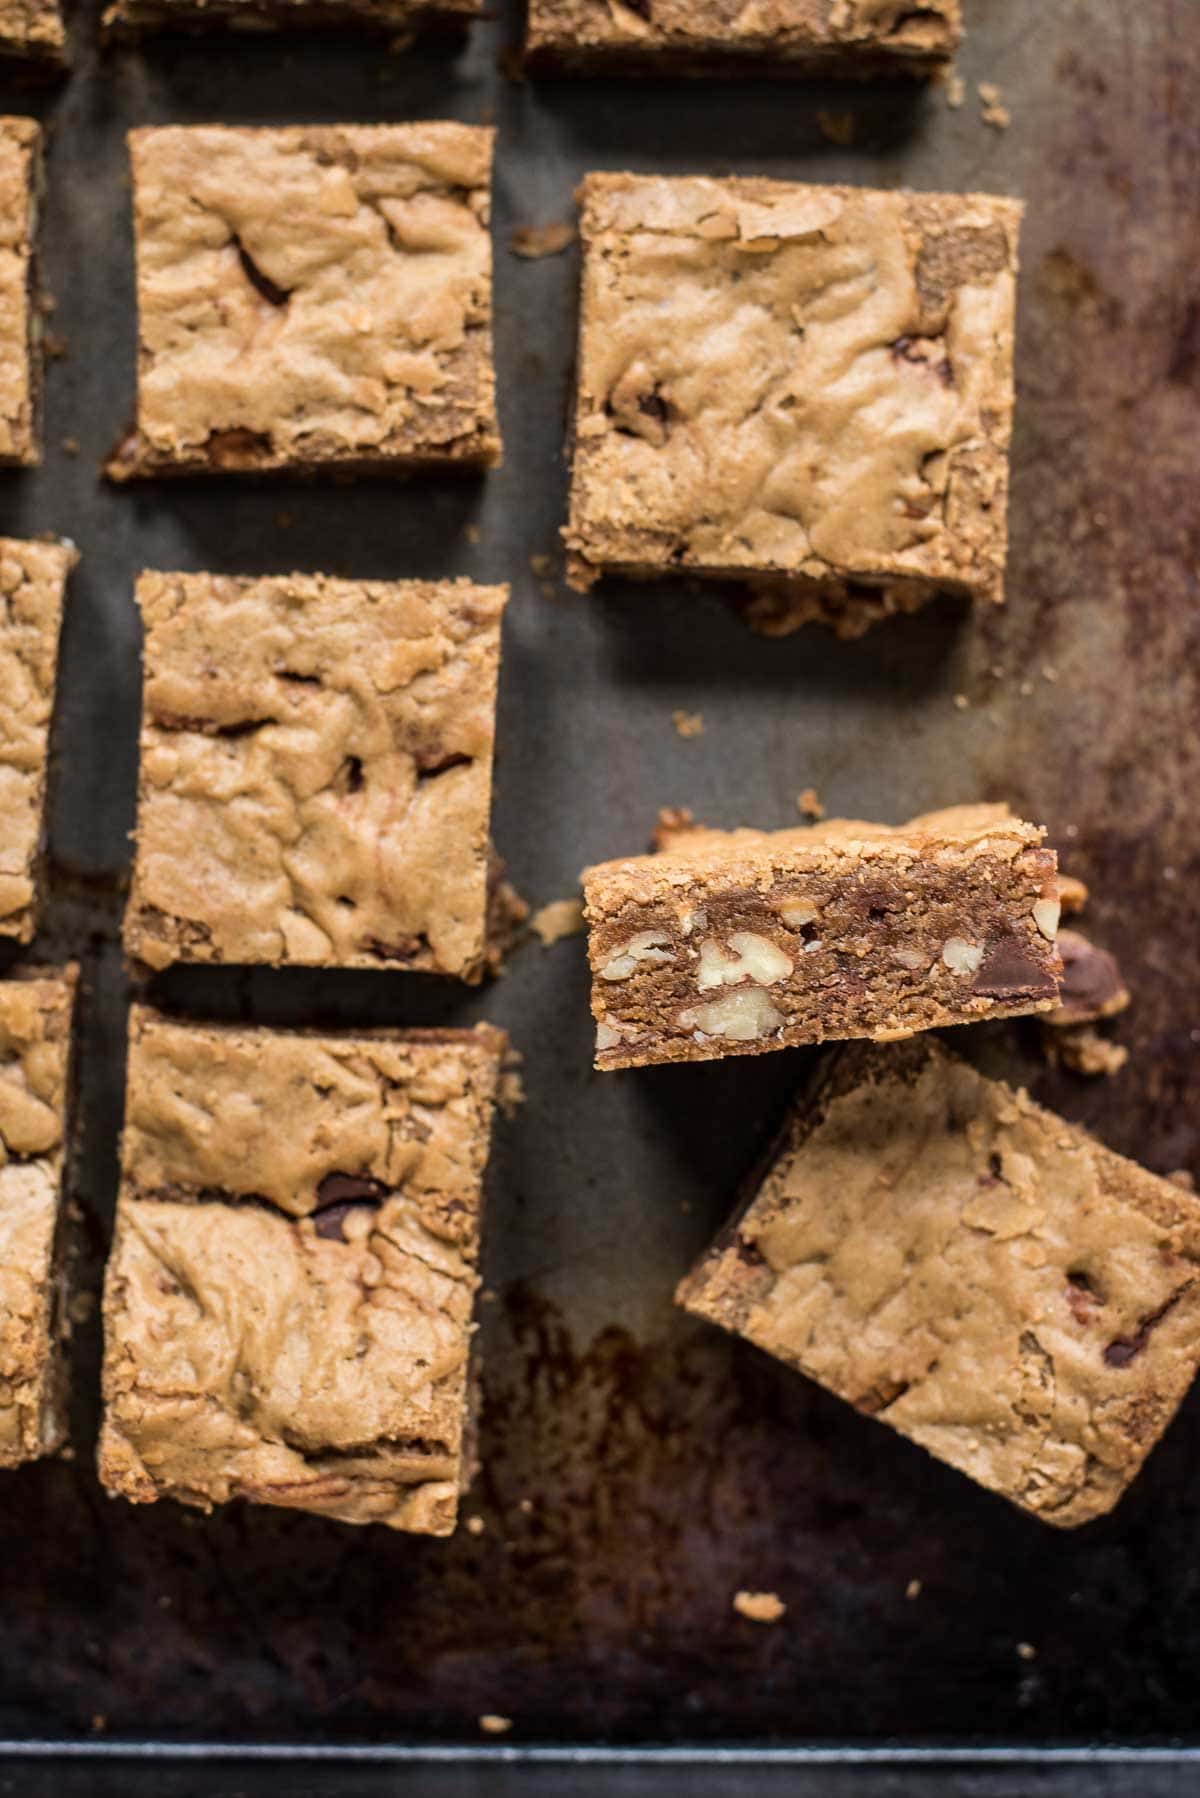 When you need a nostalgic, simple dessert, look no further than these Chewy Browned Butter Blondies.